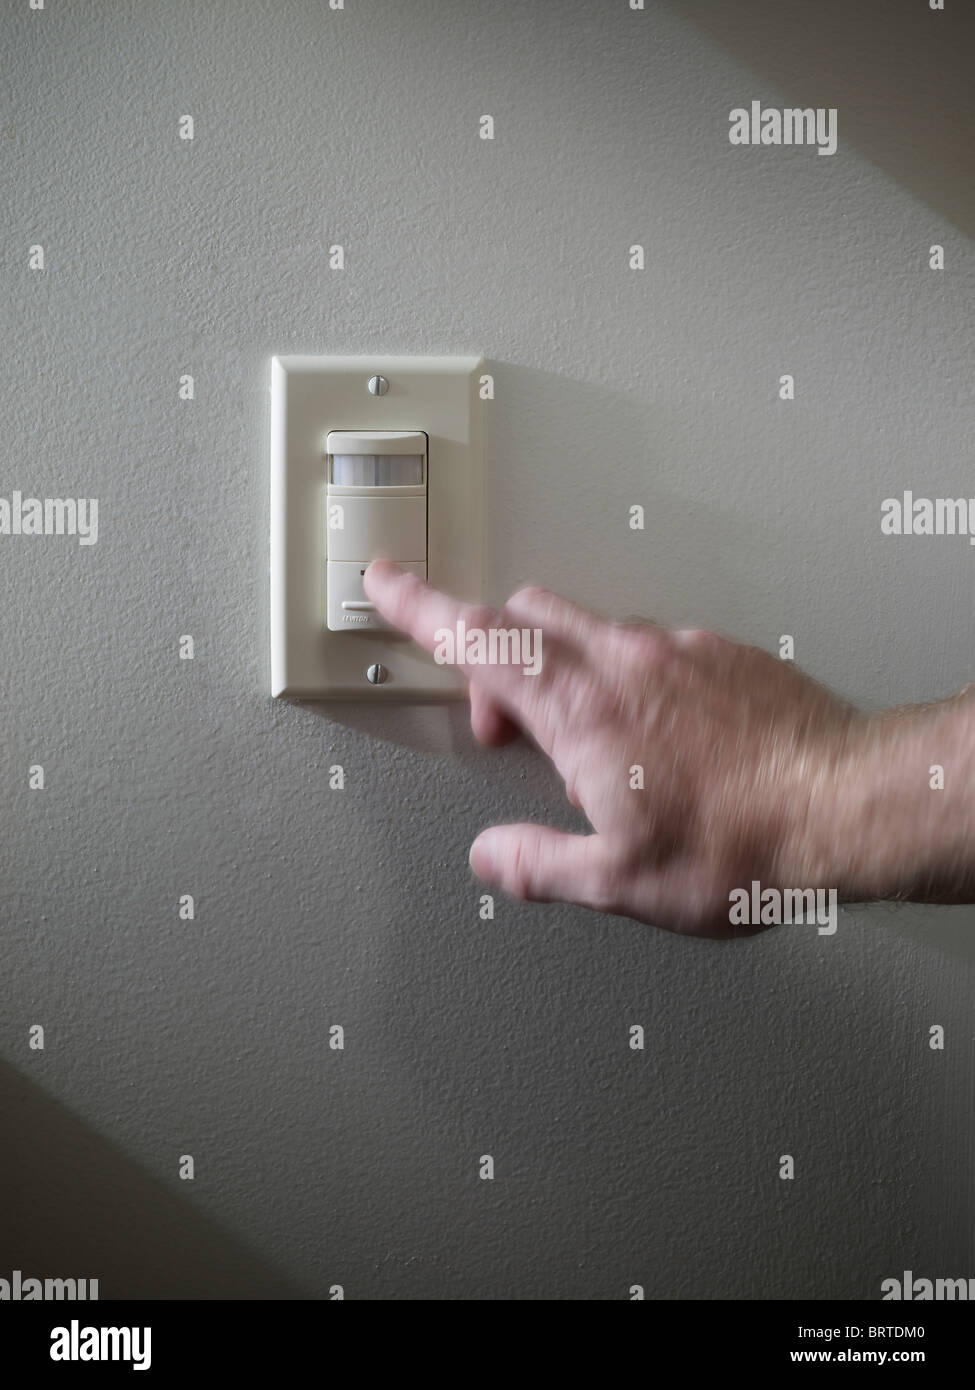 Turning Off Energy Conserving Light Switch, USA Stock Photo